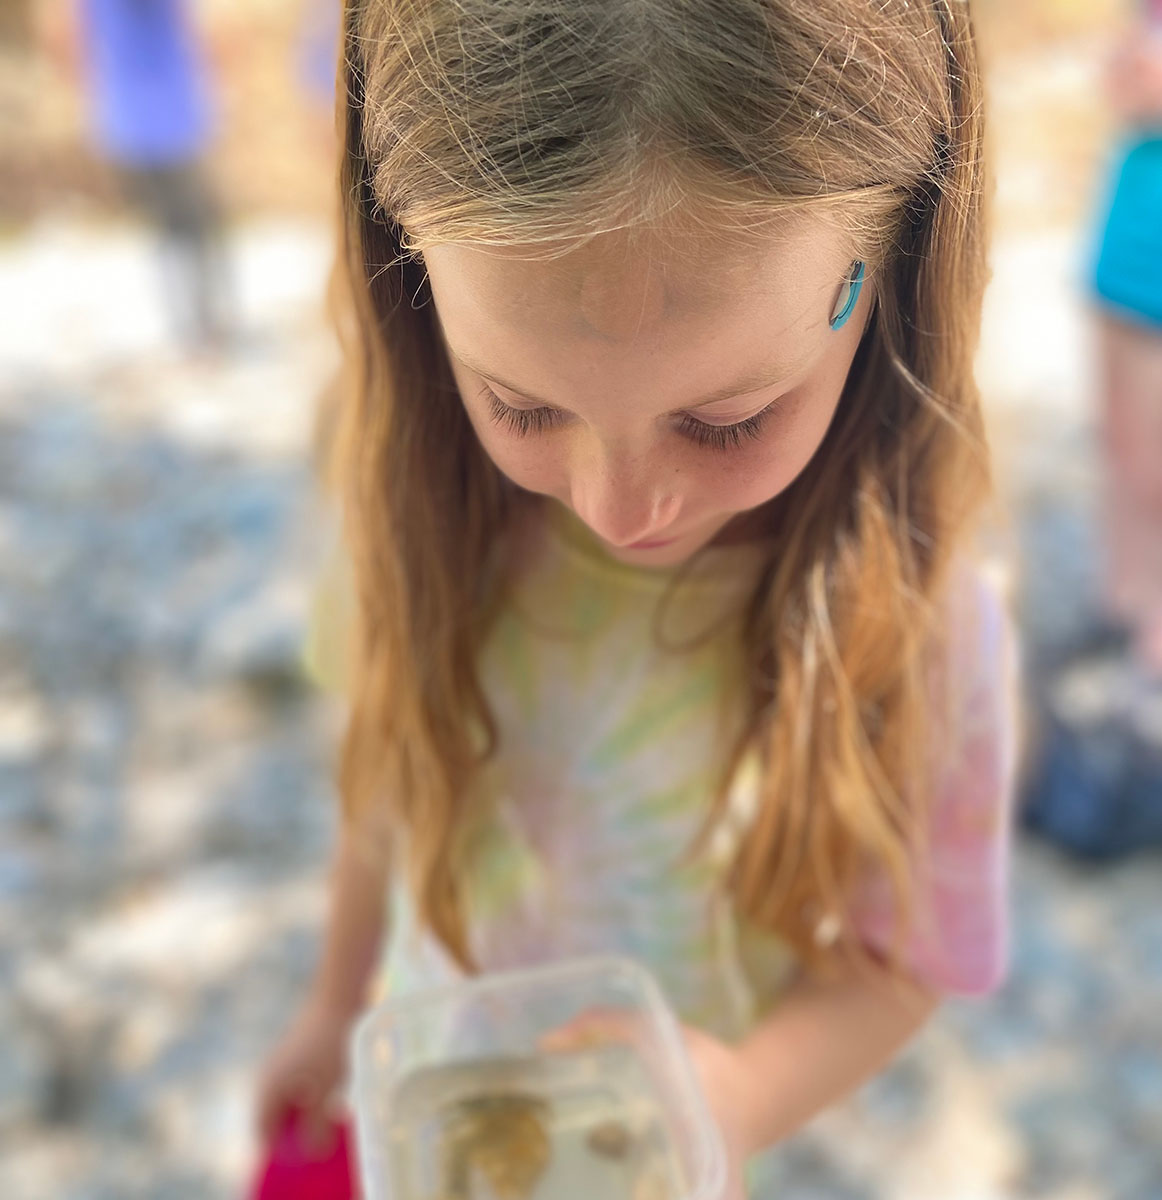 Child holding a jar with minnows in it from the creek